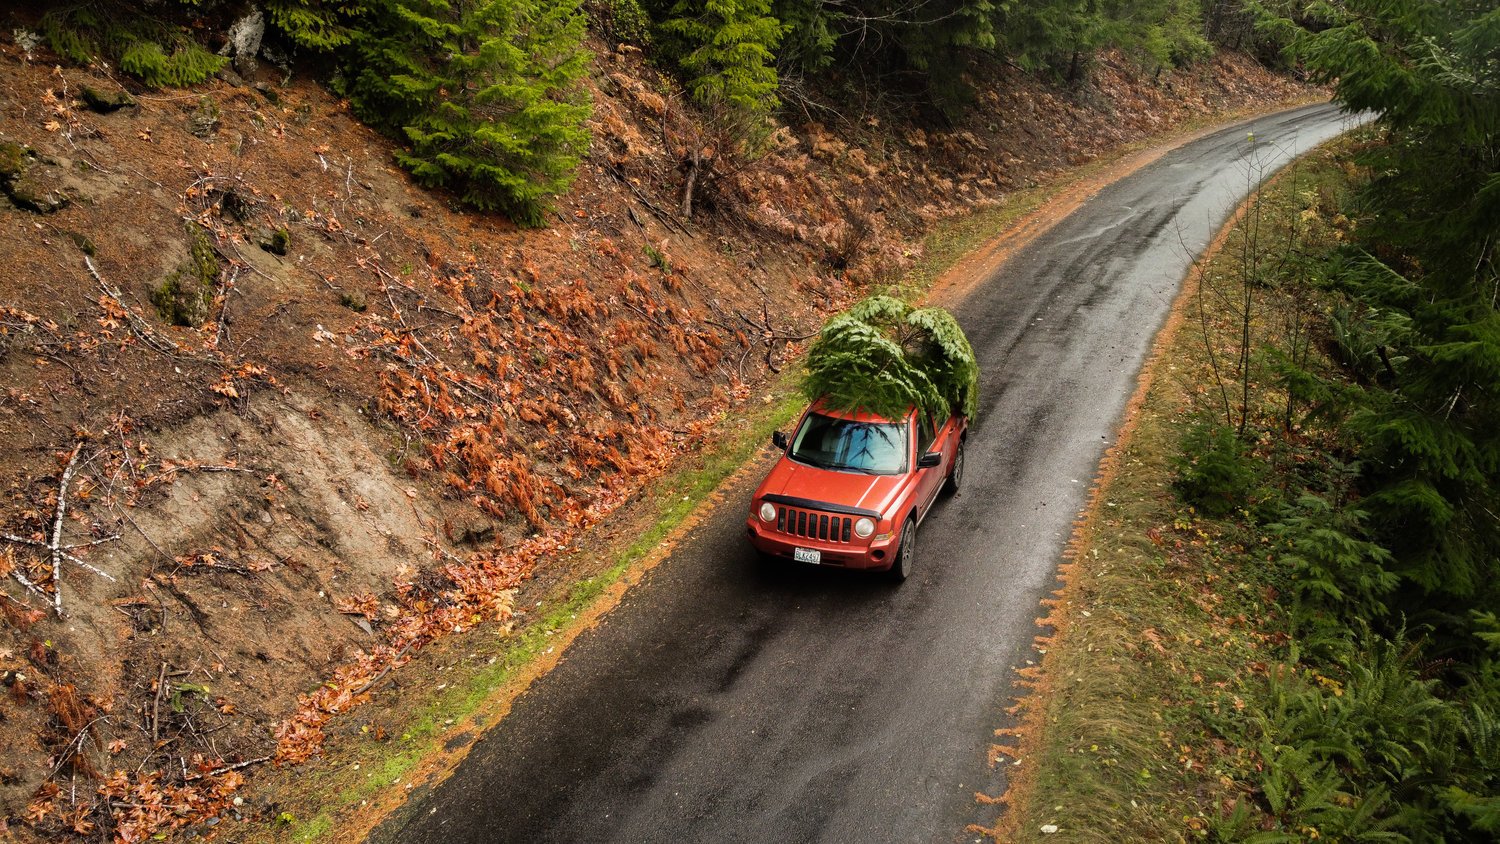 A Christmas Tree sits atop a vehicle traveling down Forest Road 23 in the Gifford Pinchot National Forest in November 2021.